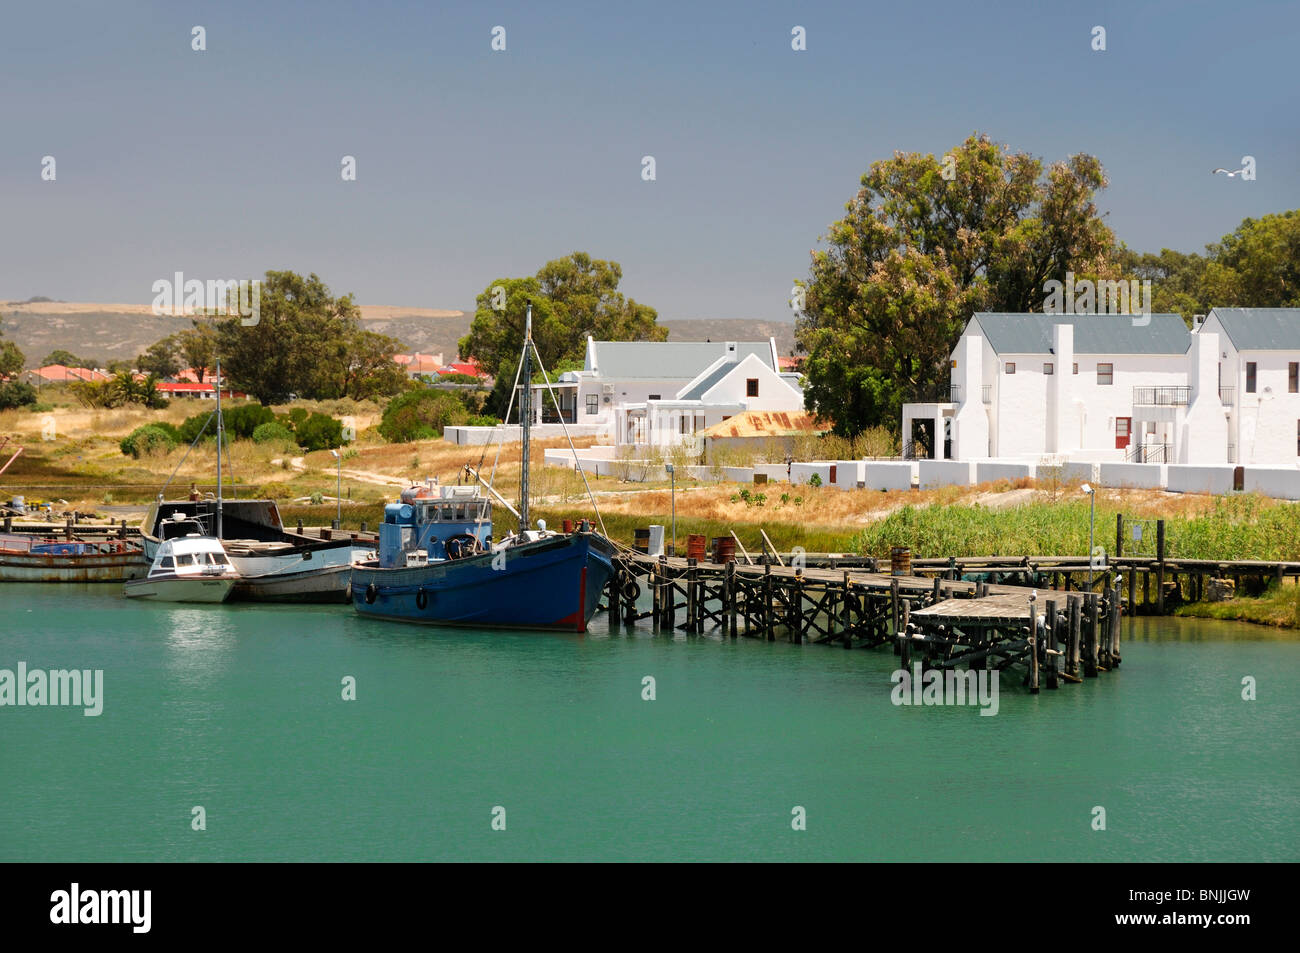 view from Bridge inlet at Velddrif Western Cape South Africa landscape water houses coast boats Stock Photo